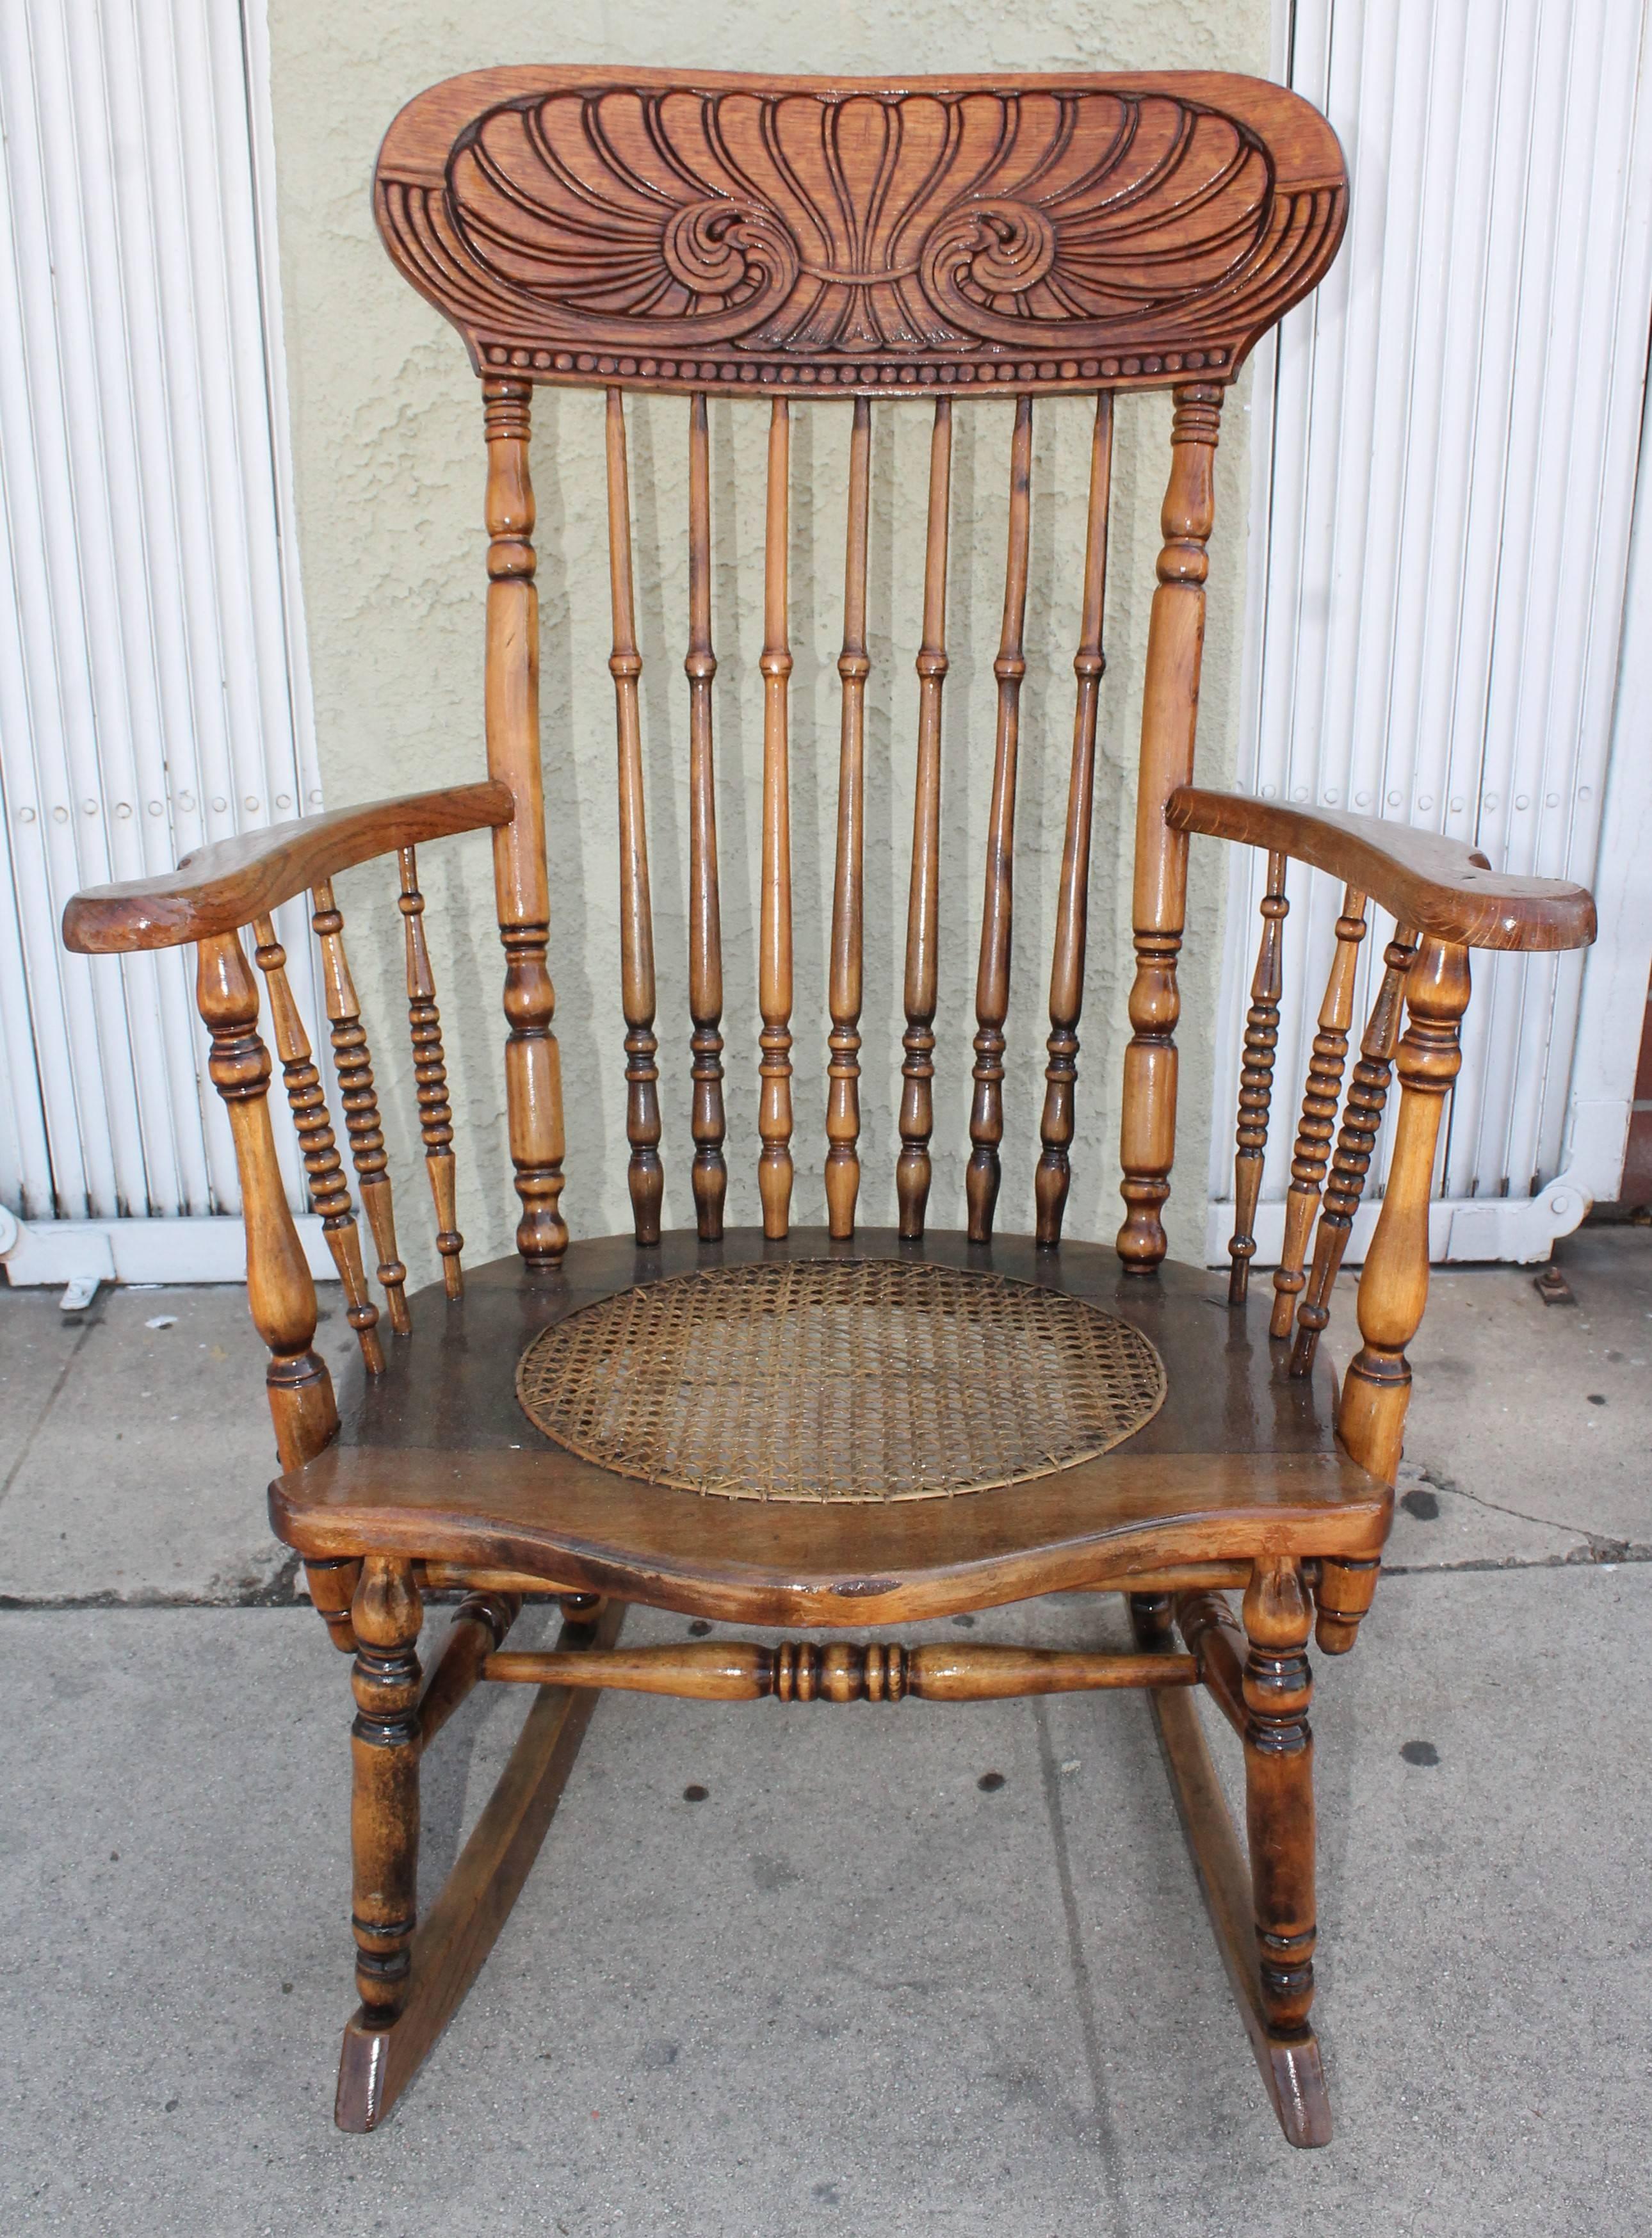 old rocking chair with hole in seat